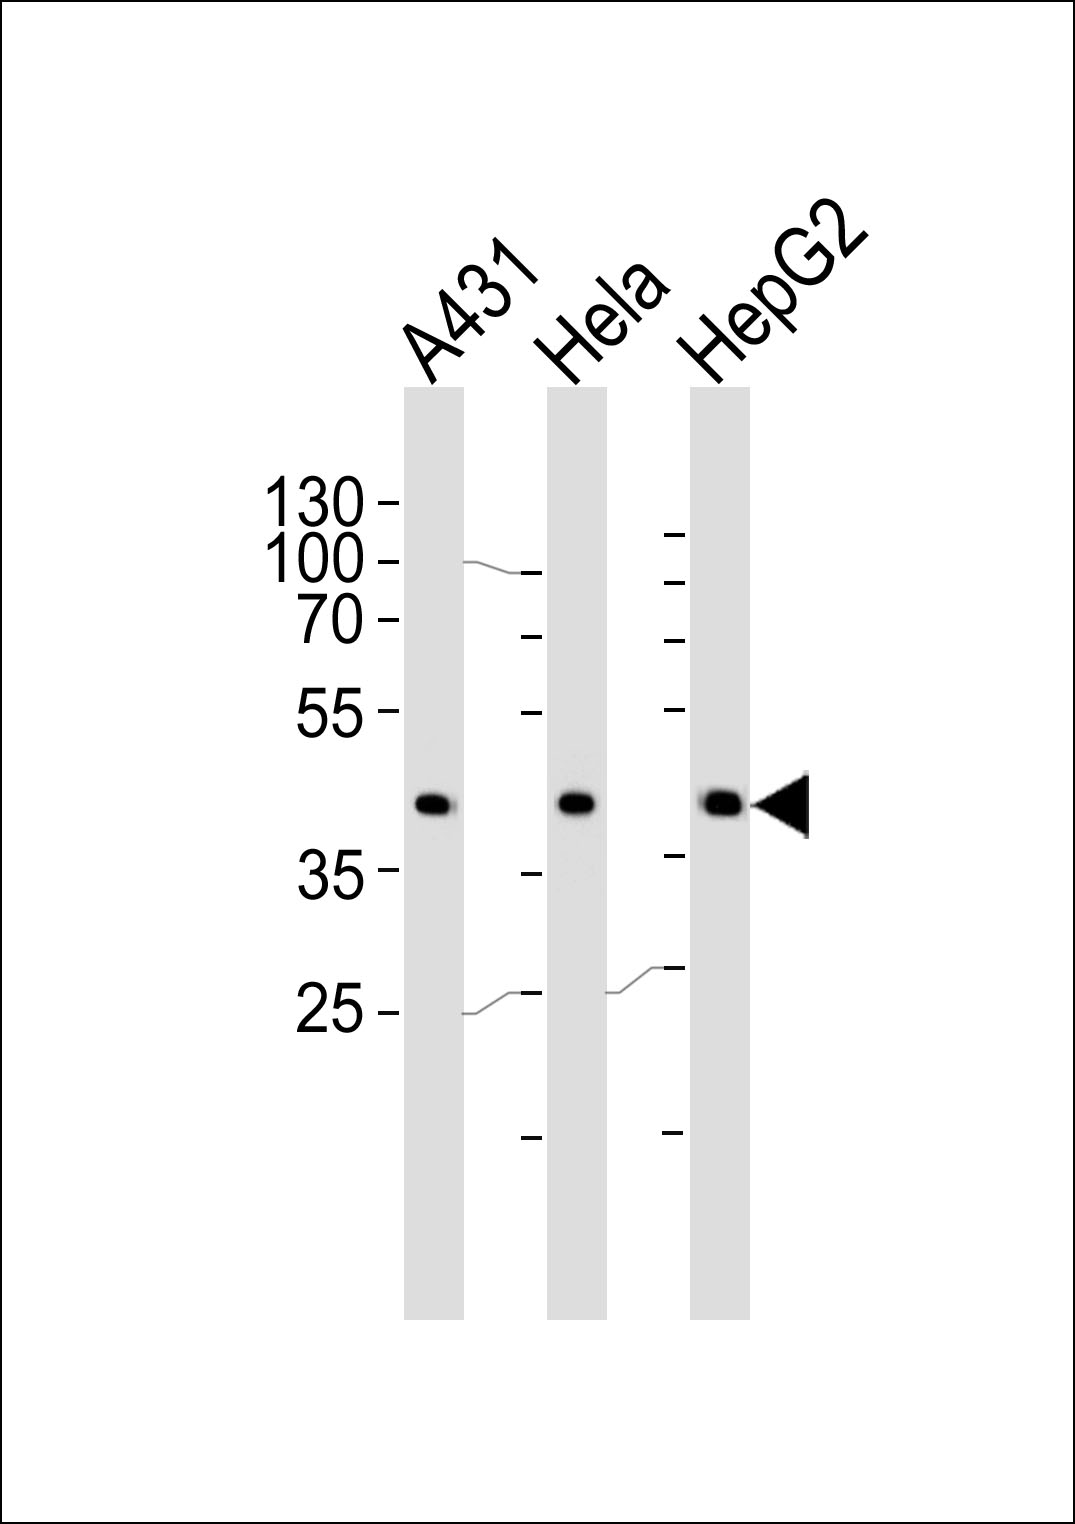 Western blot analysis of lysates from A431, Hela, HepG2 cell line (from left to right), using CSNK2A1 Antibody (Center) (Cat. # AP20595c).  AP20595c was diluted at 1:1000 at each lane.  A goat anti-rabbit IgG H&L(HRP) at 1:5000 dilution was used as the secondary antibody. Lysates at 35ug per lane.